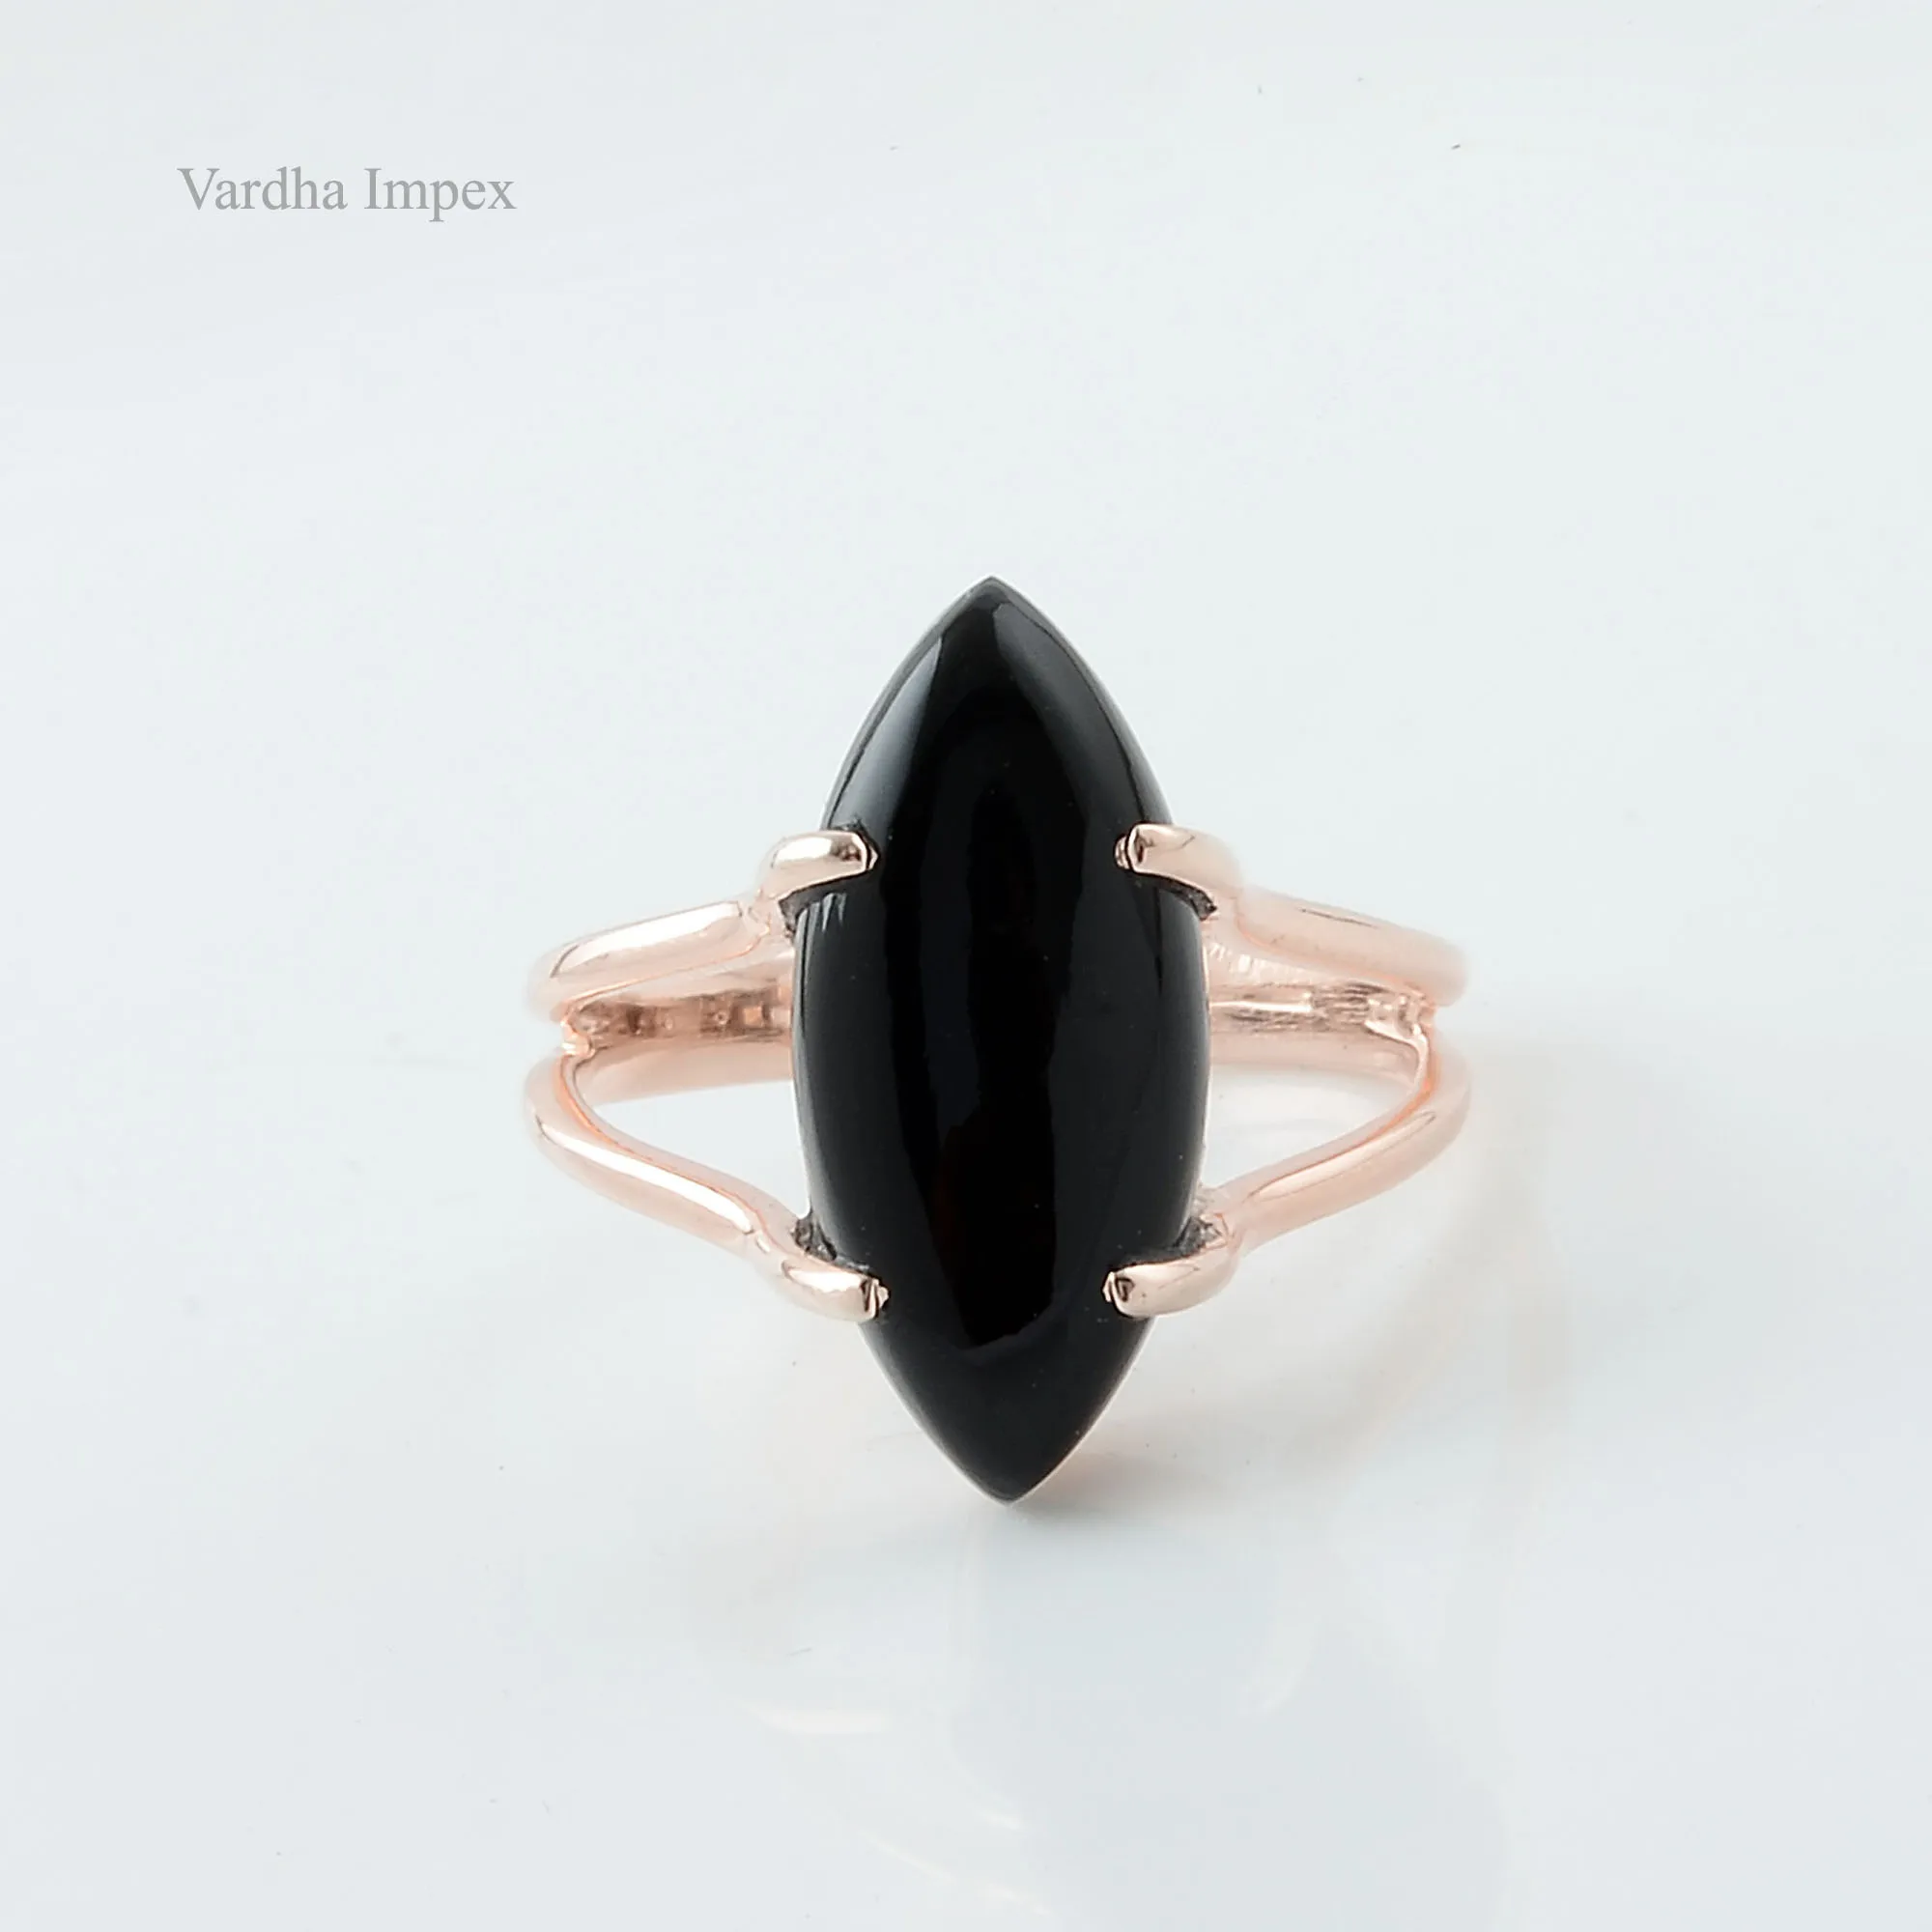 Vintage Black Onyx Ring 925 Sterling Silver Ring 18k Rose Gold Plated Marquise Ring Wholesale Gemstone Prong Setting Ring Buy Custom Jewelry Wholesale 925 Sterling Silver Jewelry Ring Black Onyx Gemstone Ring For Women Wholesale